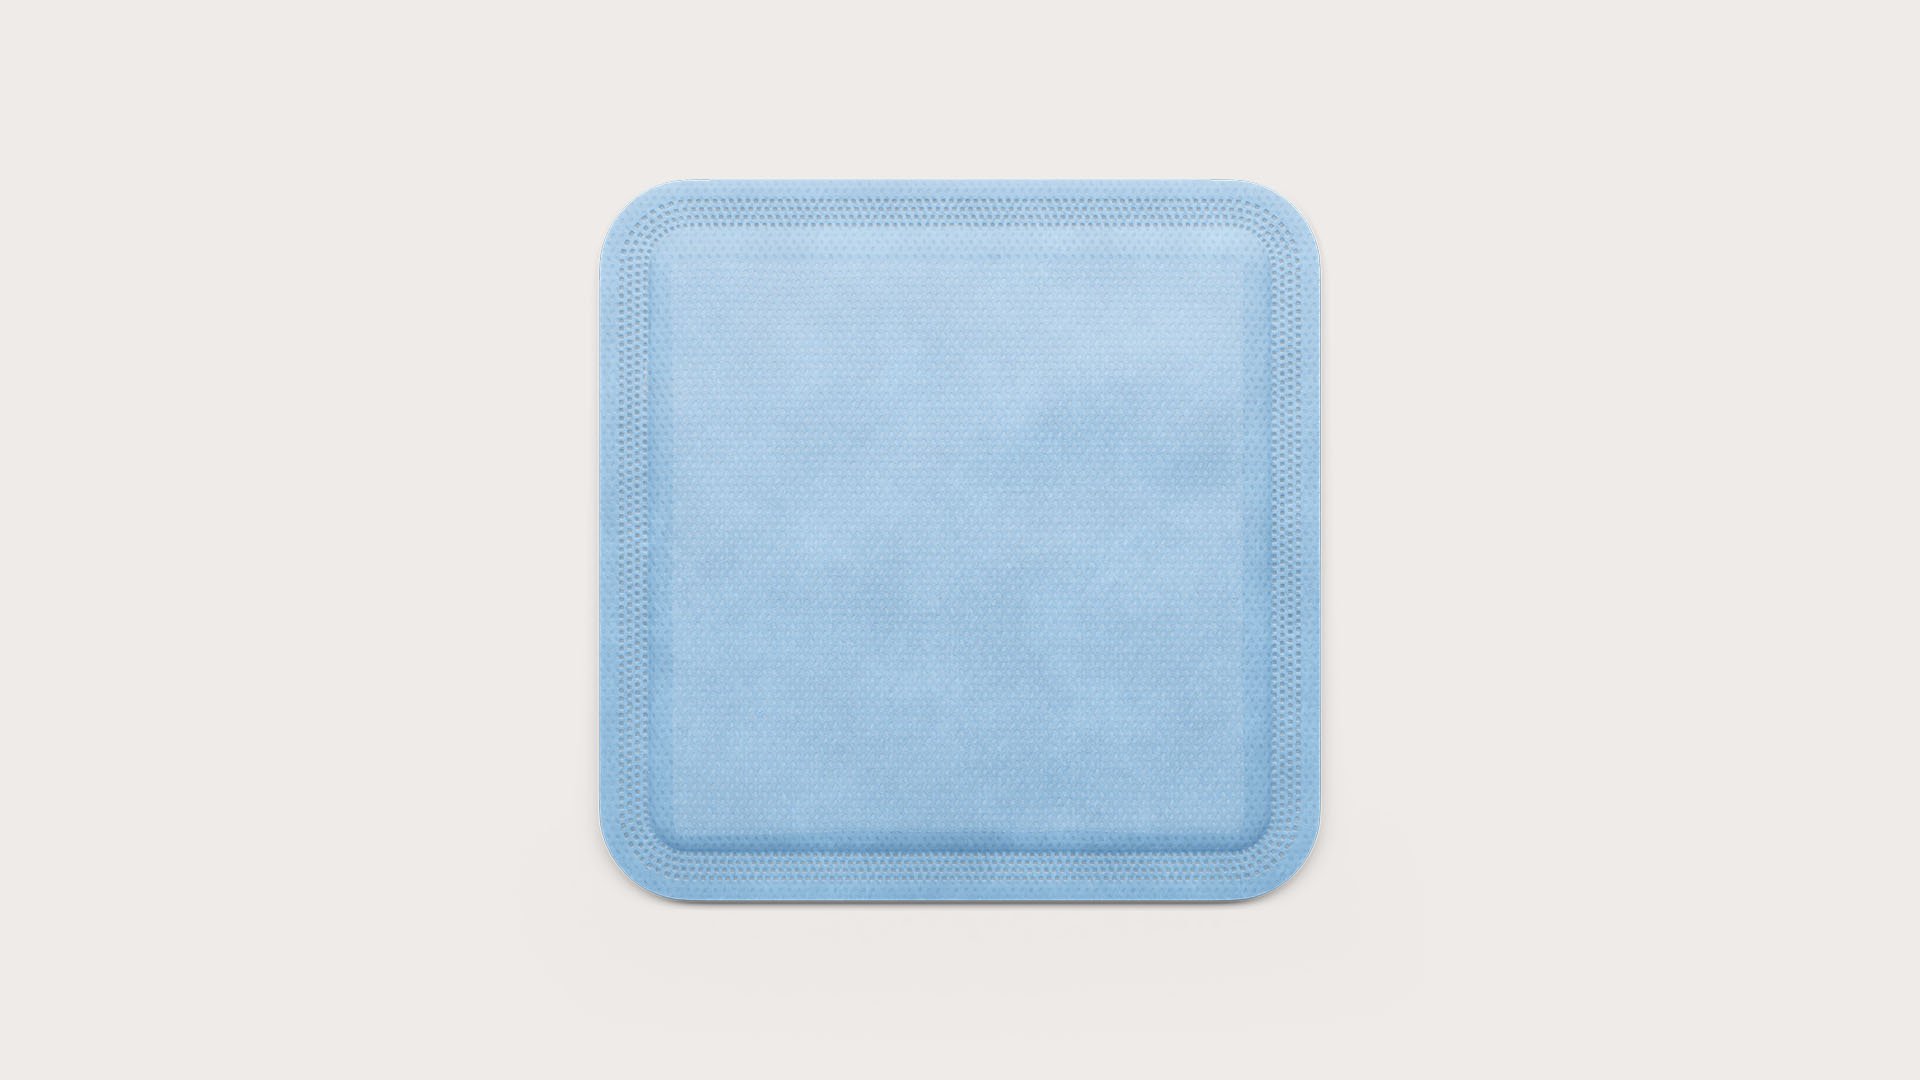 Mextra Superabsorbent image cover